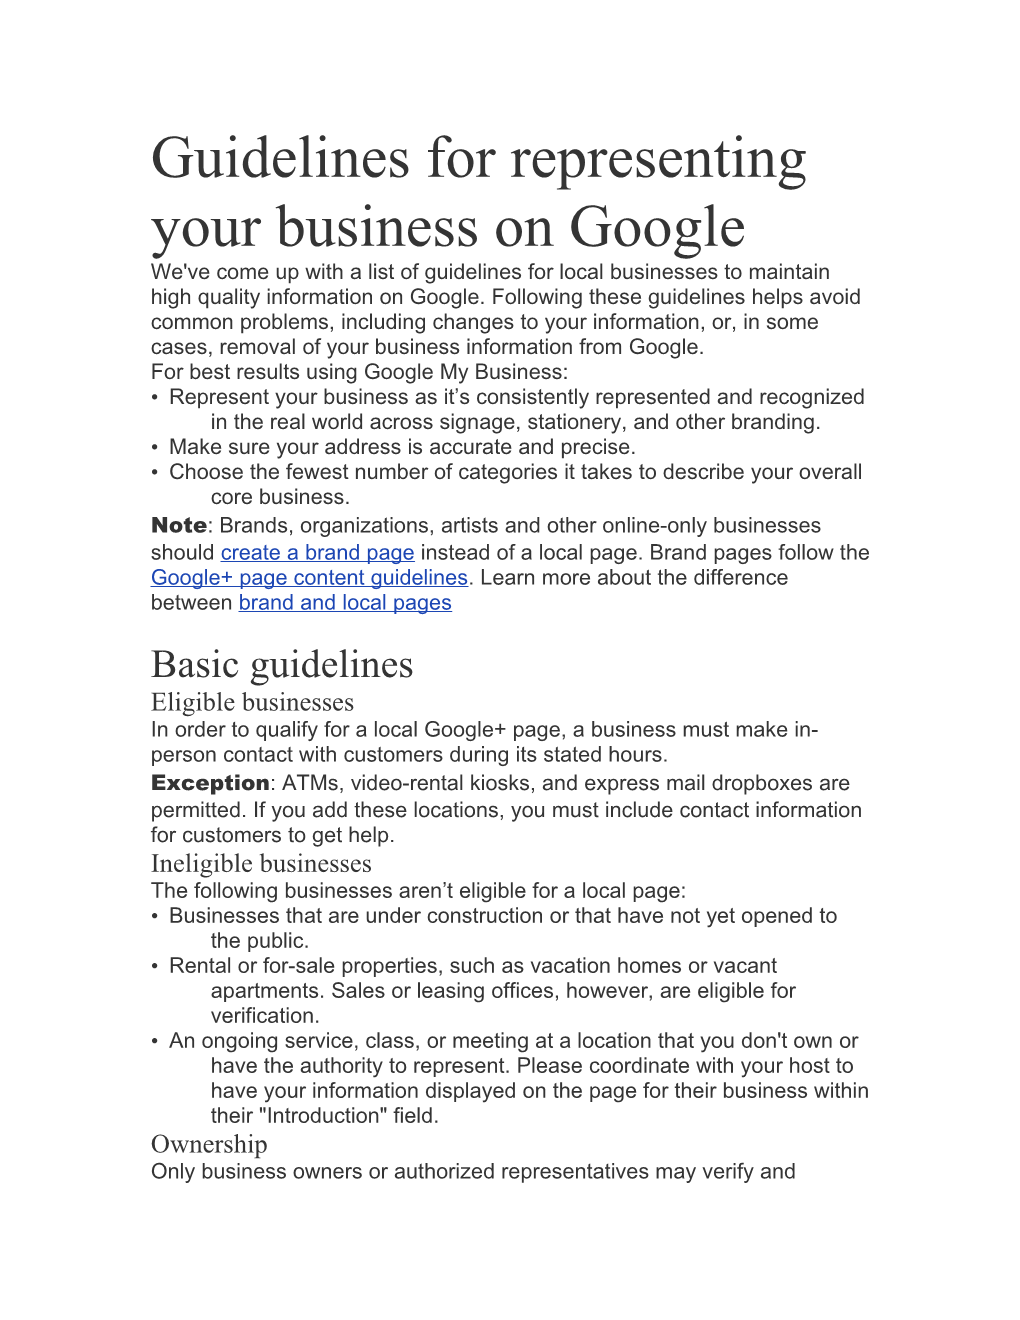 Guidelines for Representing Your Business on Google